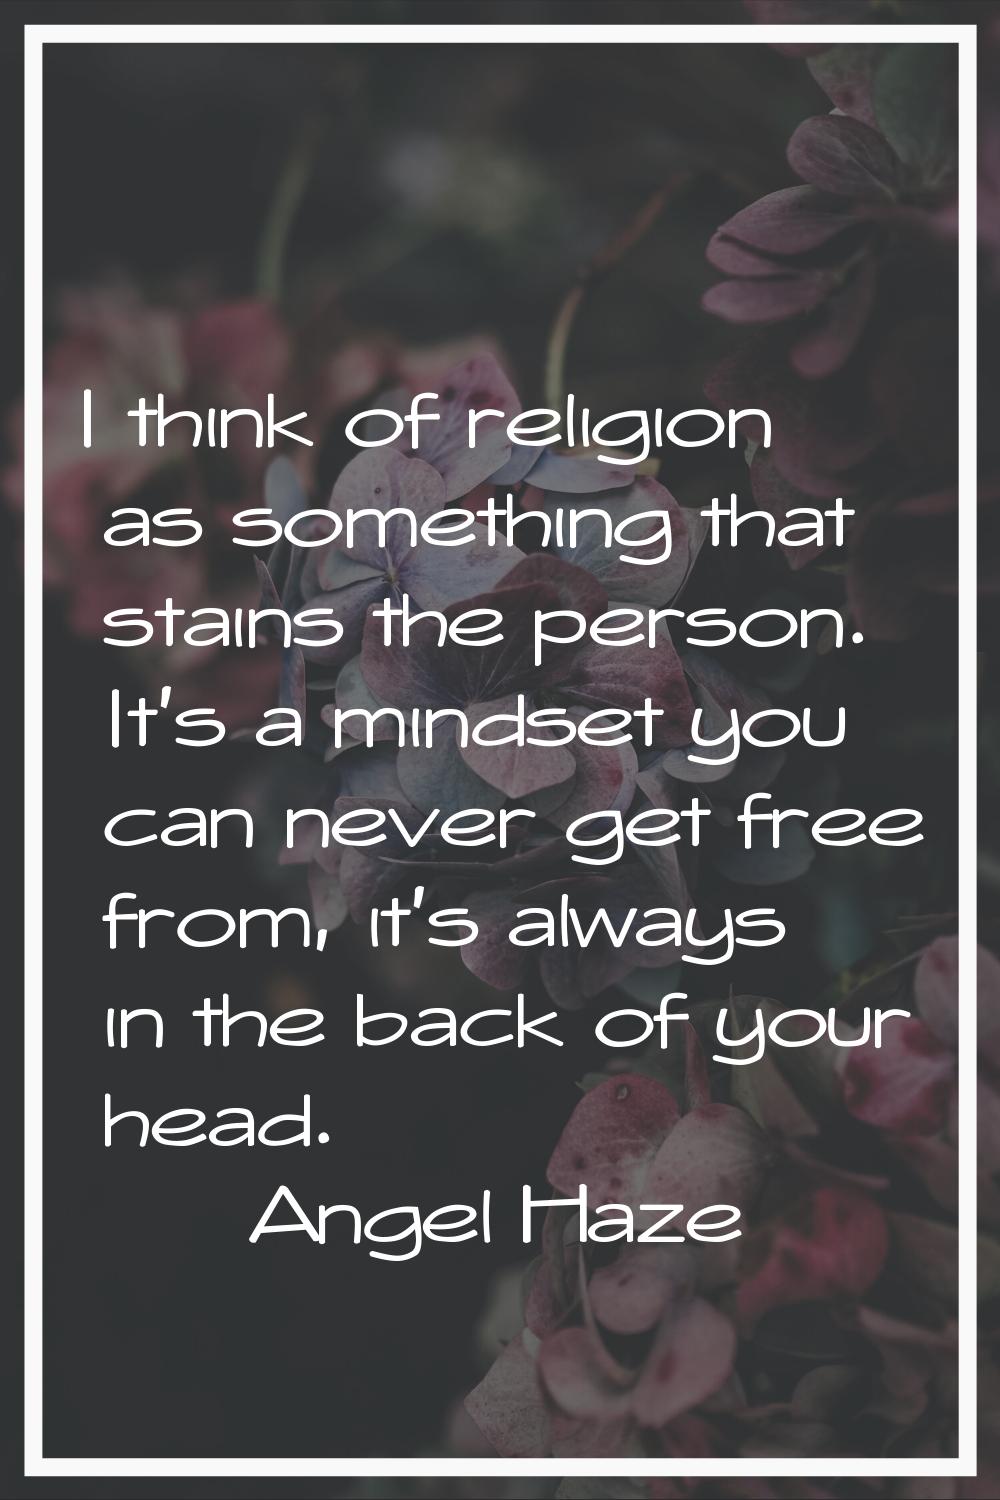 I think of religion as something that stains the person. It's a mindset you can never get free from